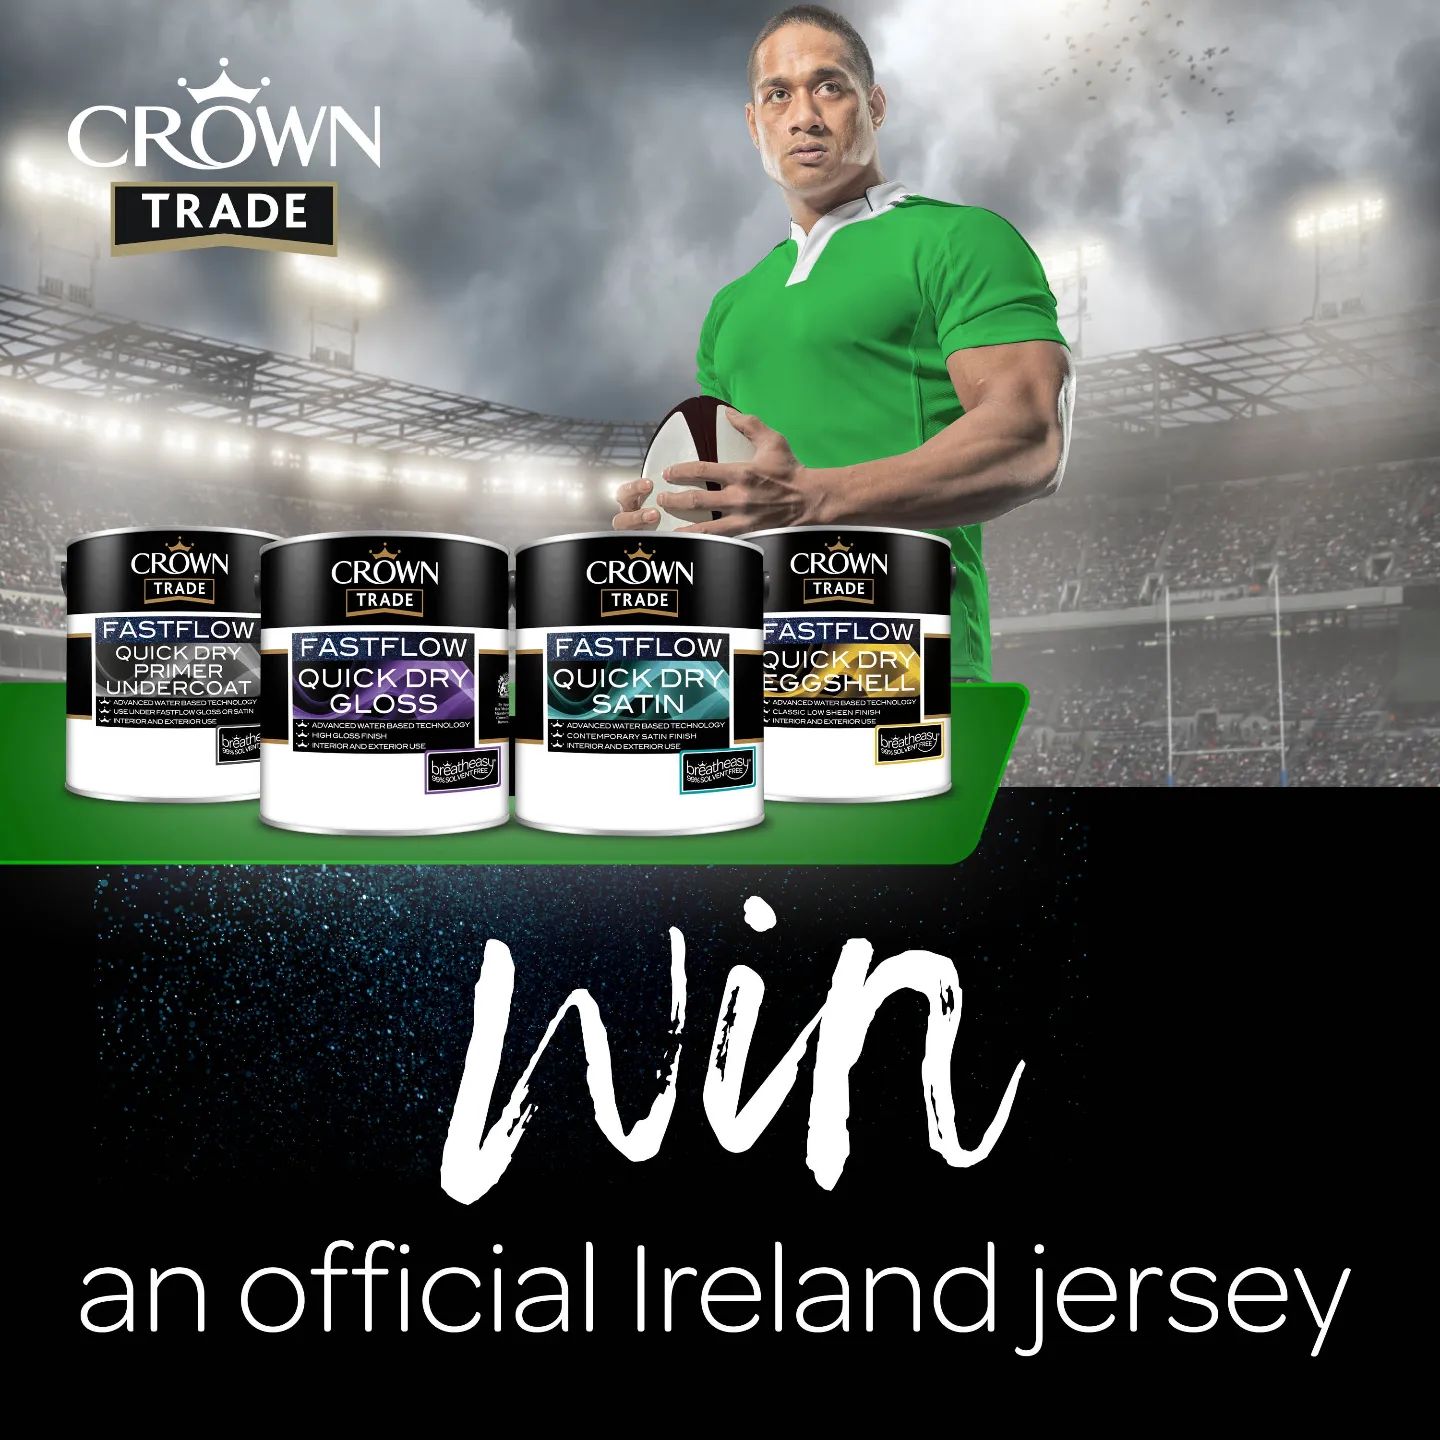 Get behind the boys in green through the Six Nations Championship. 

For your chance to win* an official Ireland rugby jersey, courtesy of @crownpaintsireland, call in-store or visit https://competition.crownpaints.ie/ to enter online.

This competition is in no way sponsored or endorsed by Instagram.

*Terms and conditions apply

See full terms and conditions at link below. 👇
 
https://online.flippingbook.com/view/908288742/